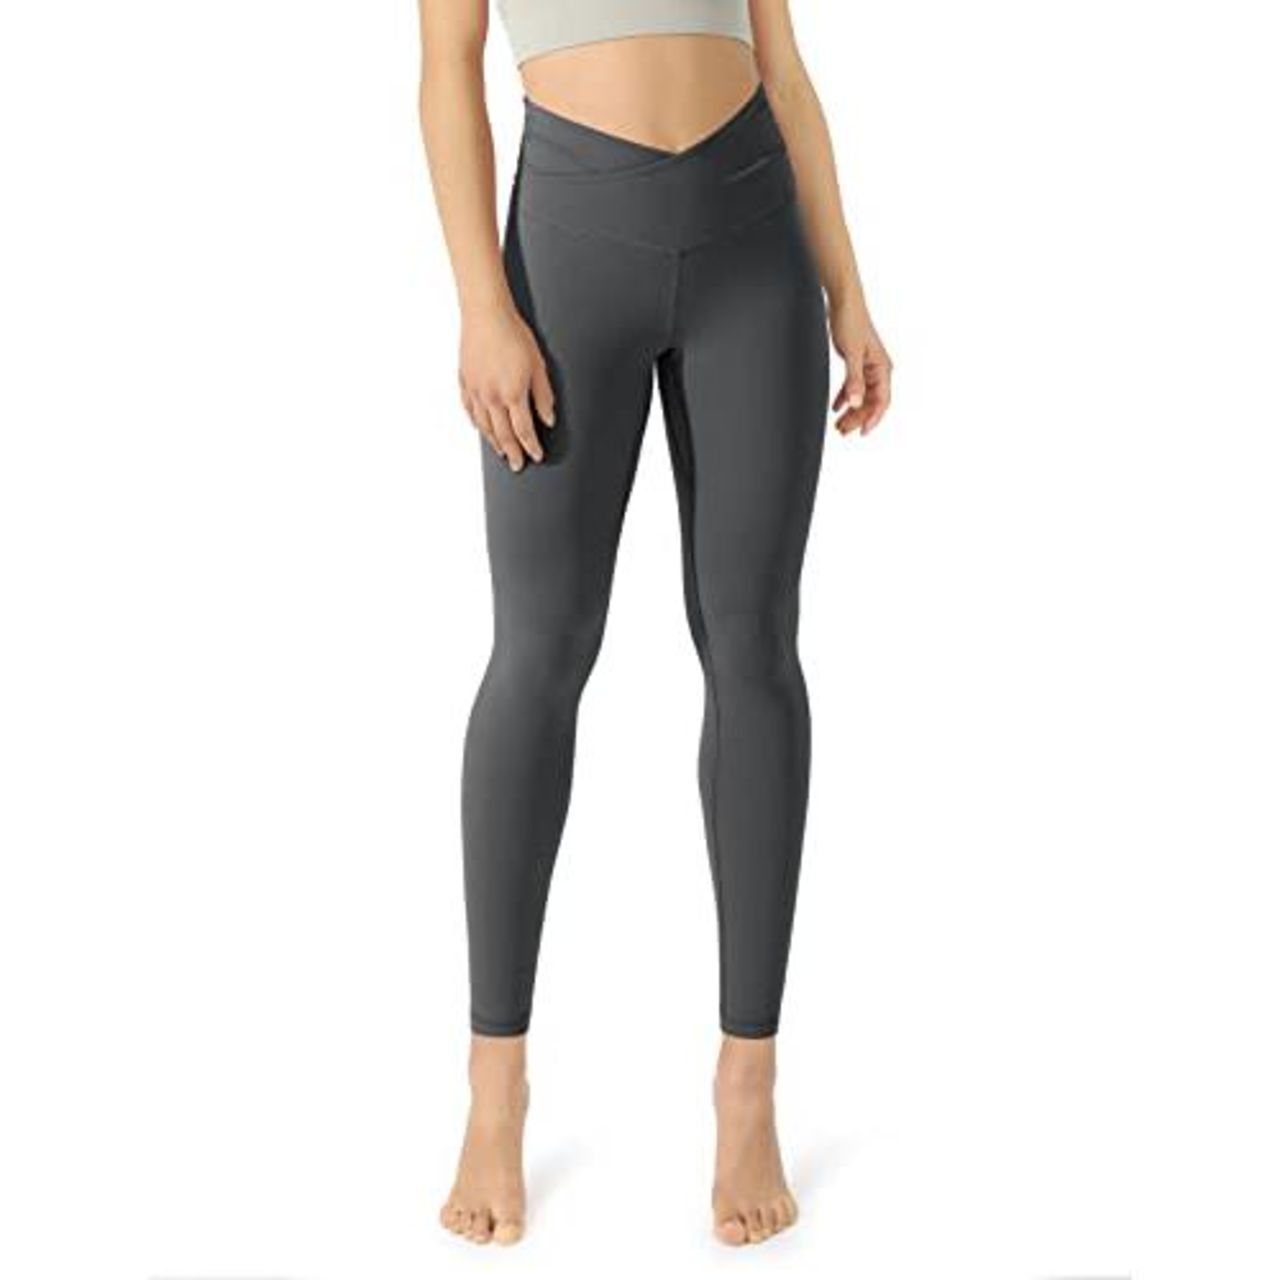 The Boost Women LEGGING (High Rise Waistband with hydro-dry Tech) – Veloz